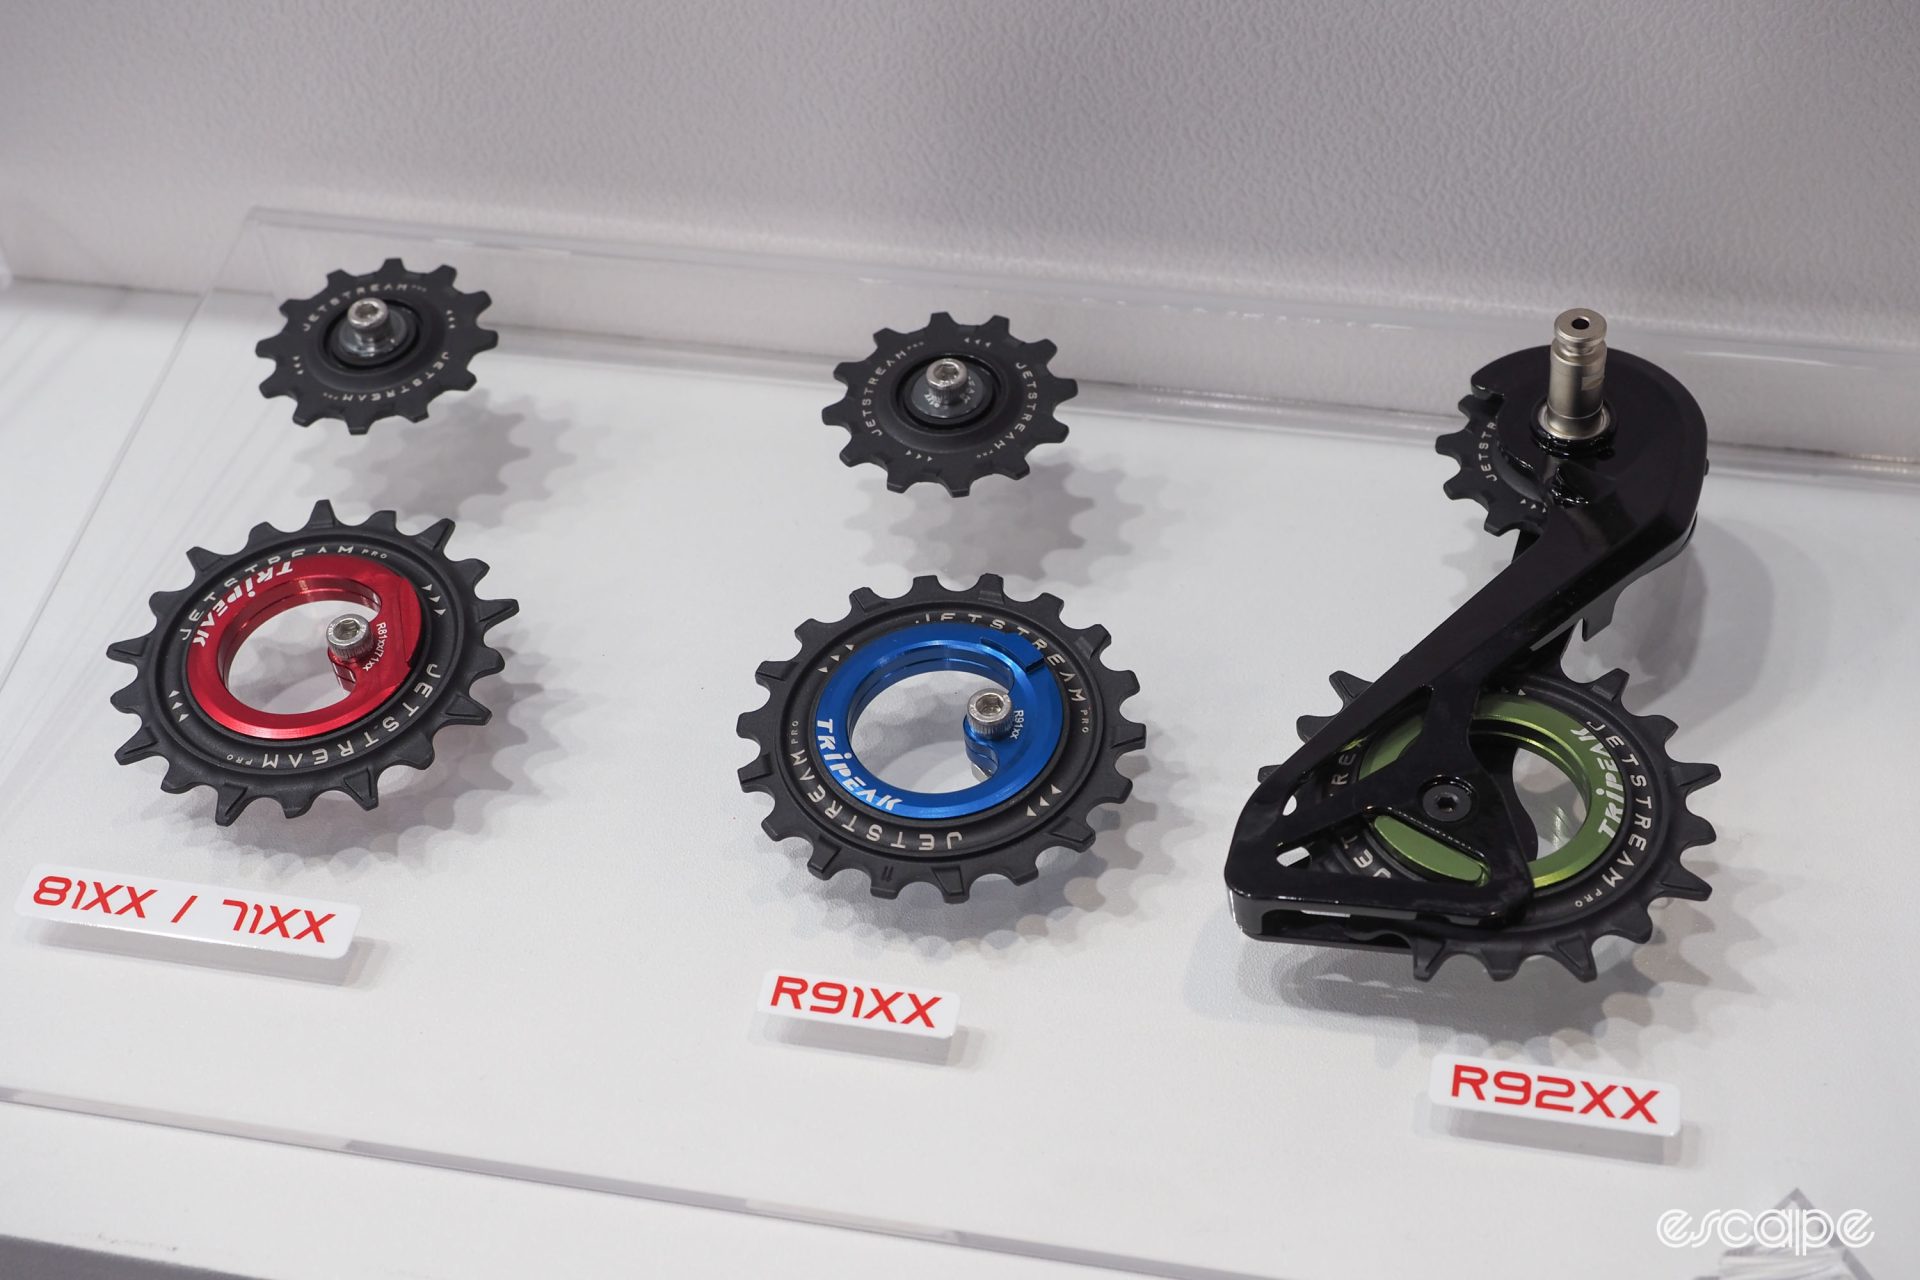 Tripeak oversized rear derailleur pulleys and cages